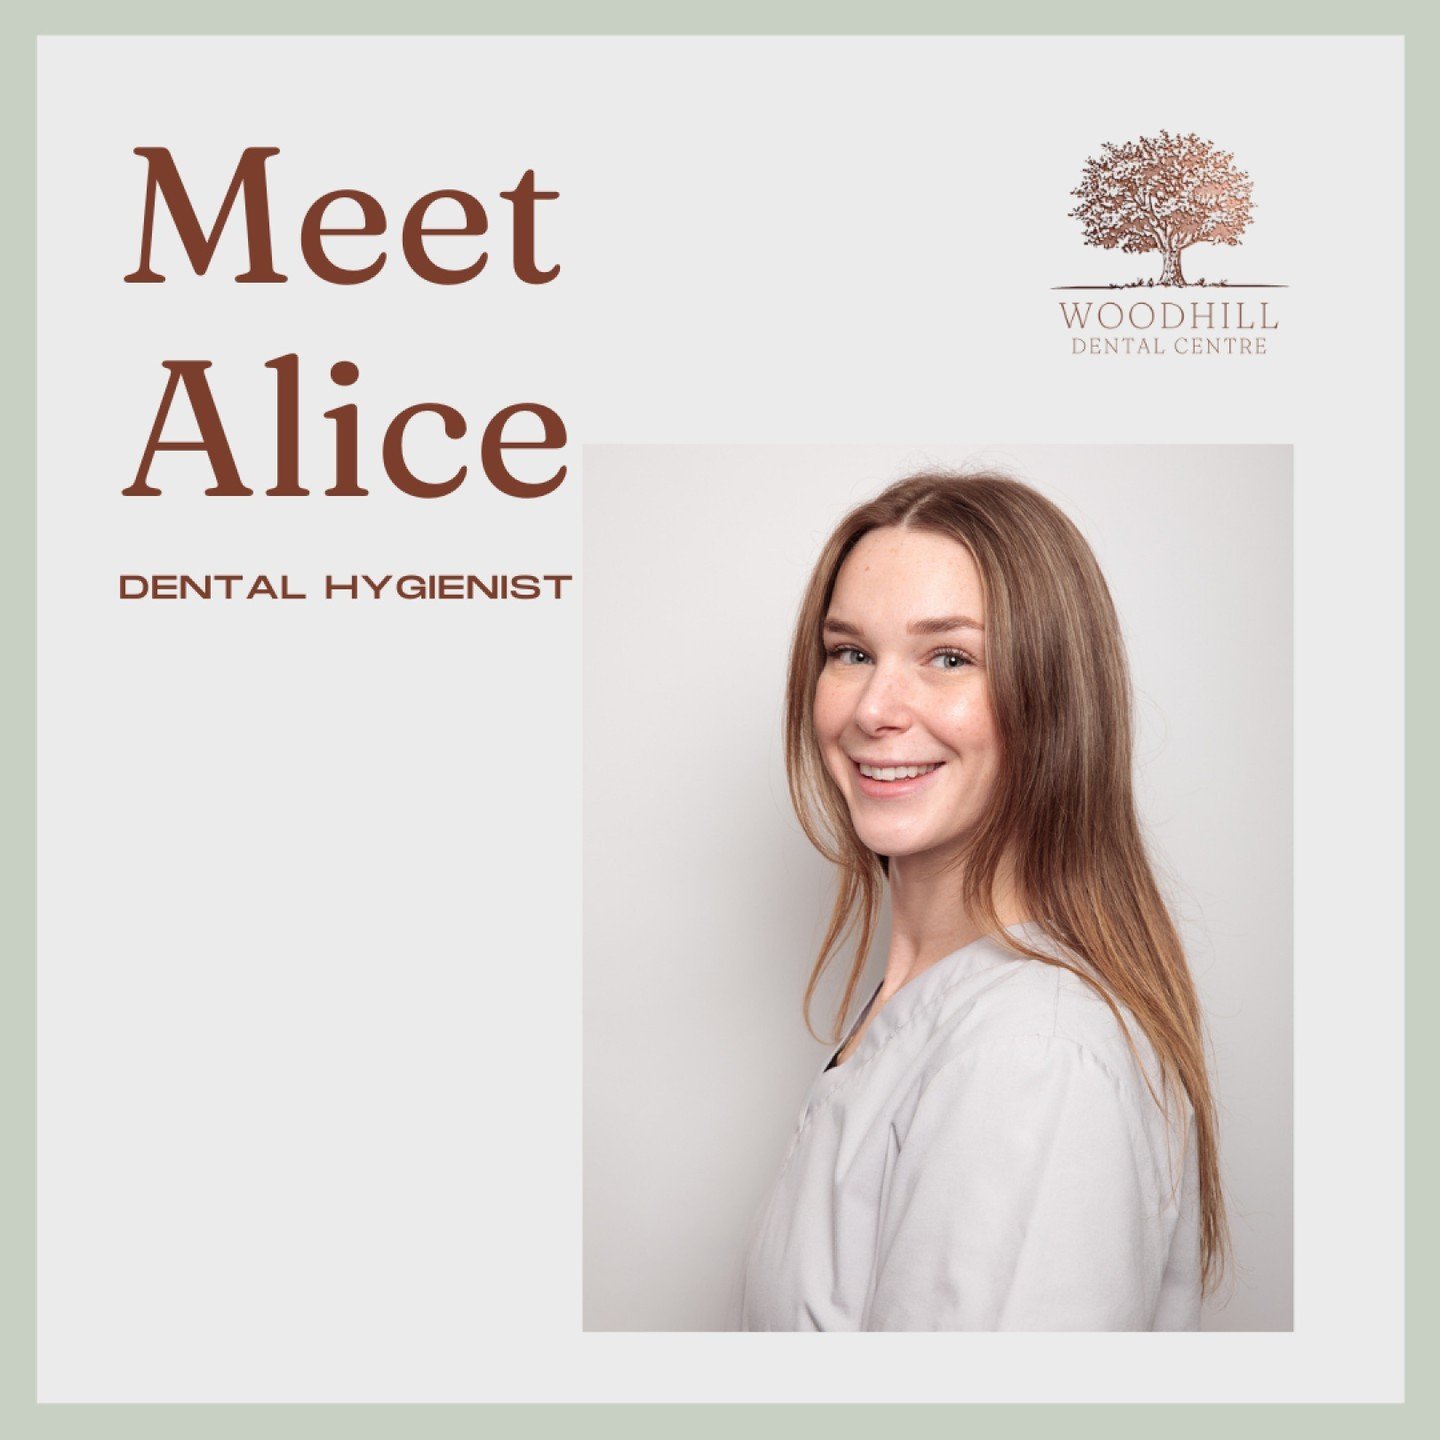 Meet the Team Monday - Introducing Alice! 

We're thrilled to introduce Alice, our dental hygiene expert!  With a Bachelor of Science in Dental Hygiene from the University of Portsmouth Dental Academy, Alice brings a wealth of knowledge about oral he